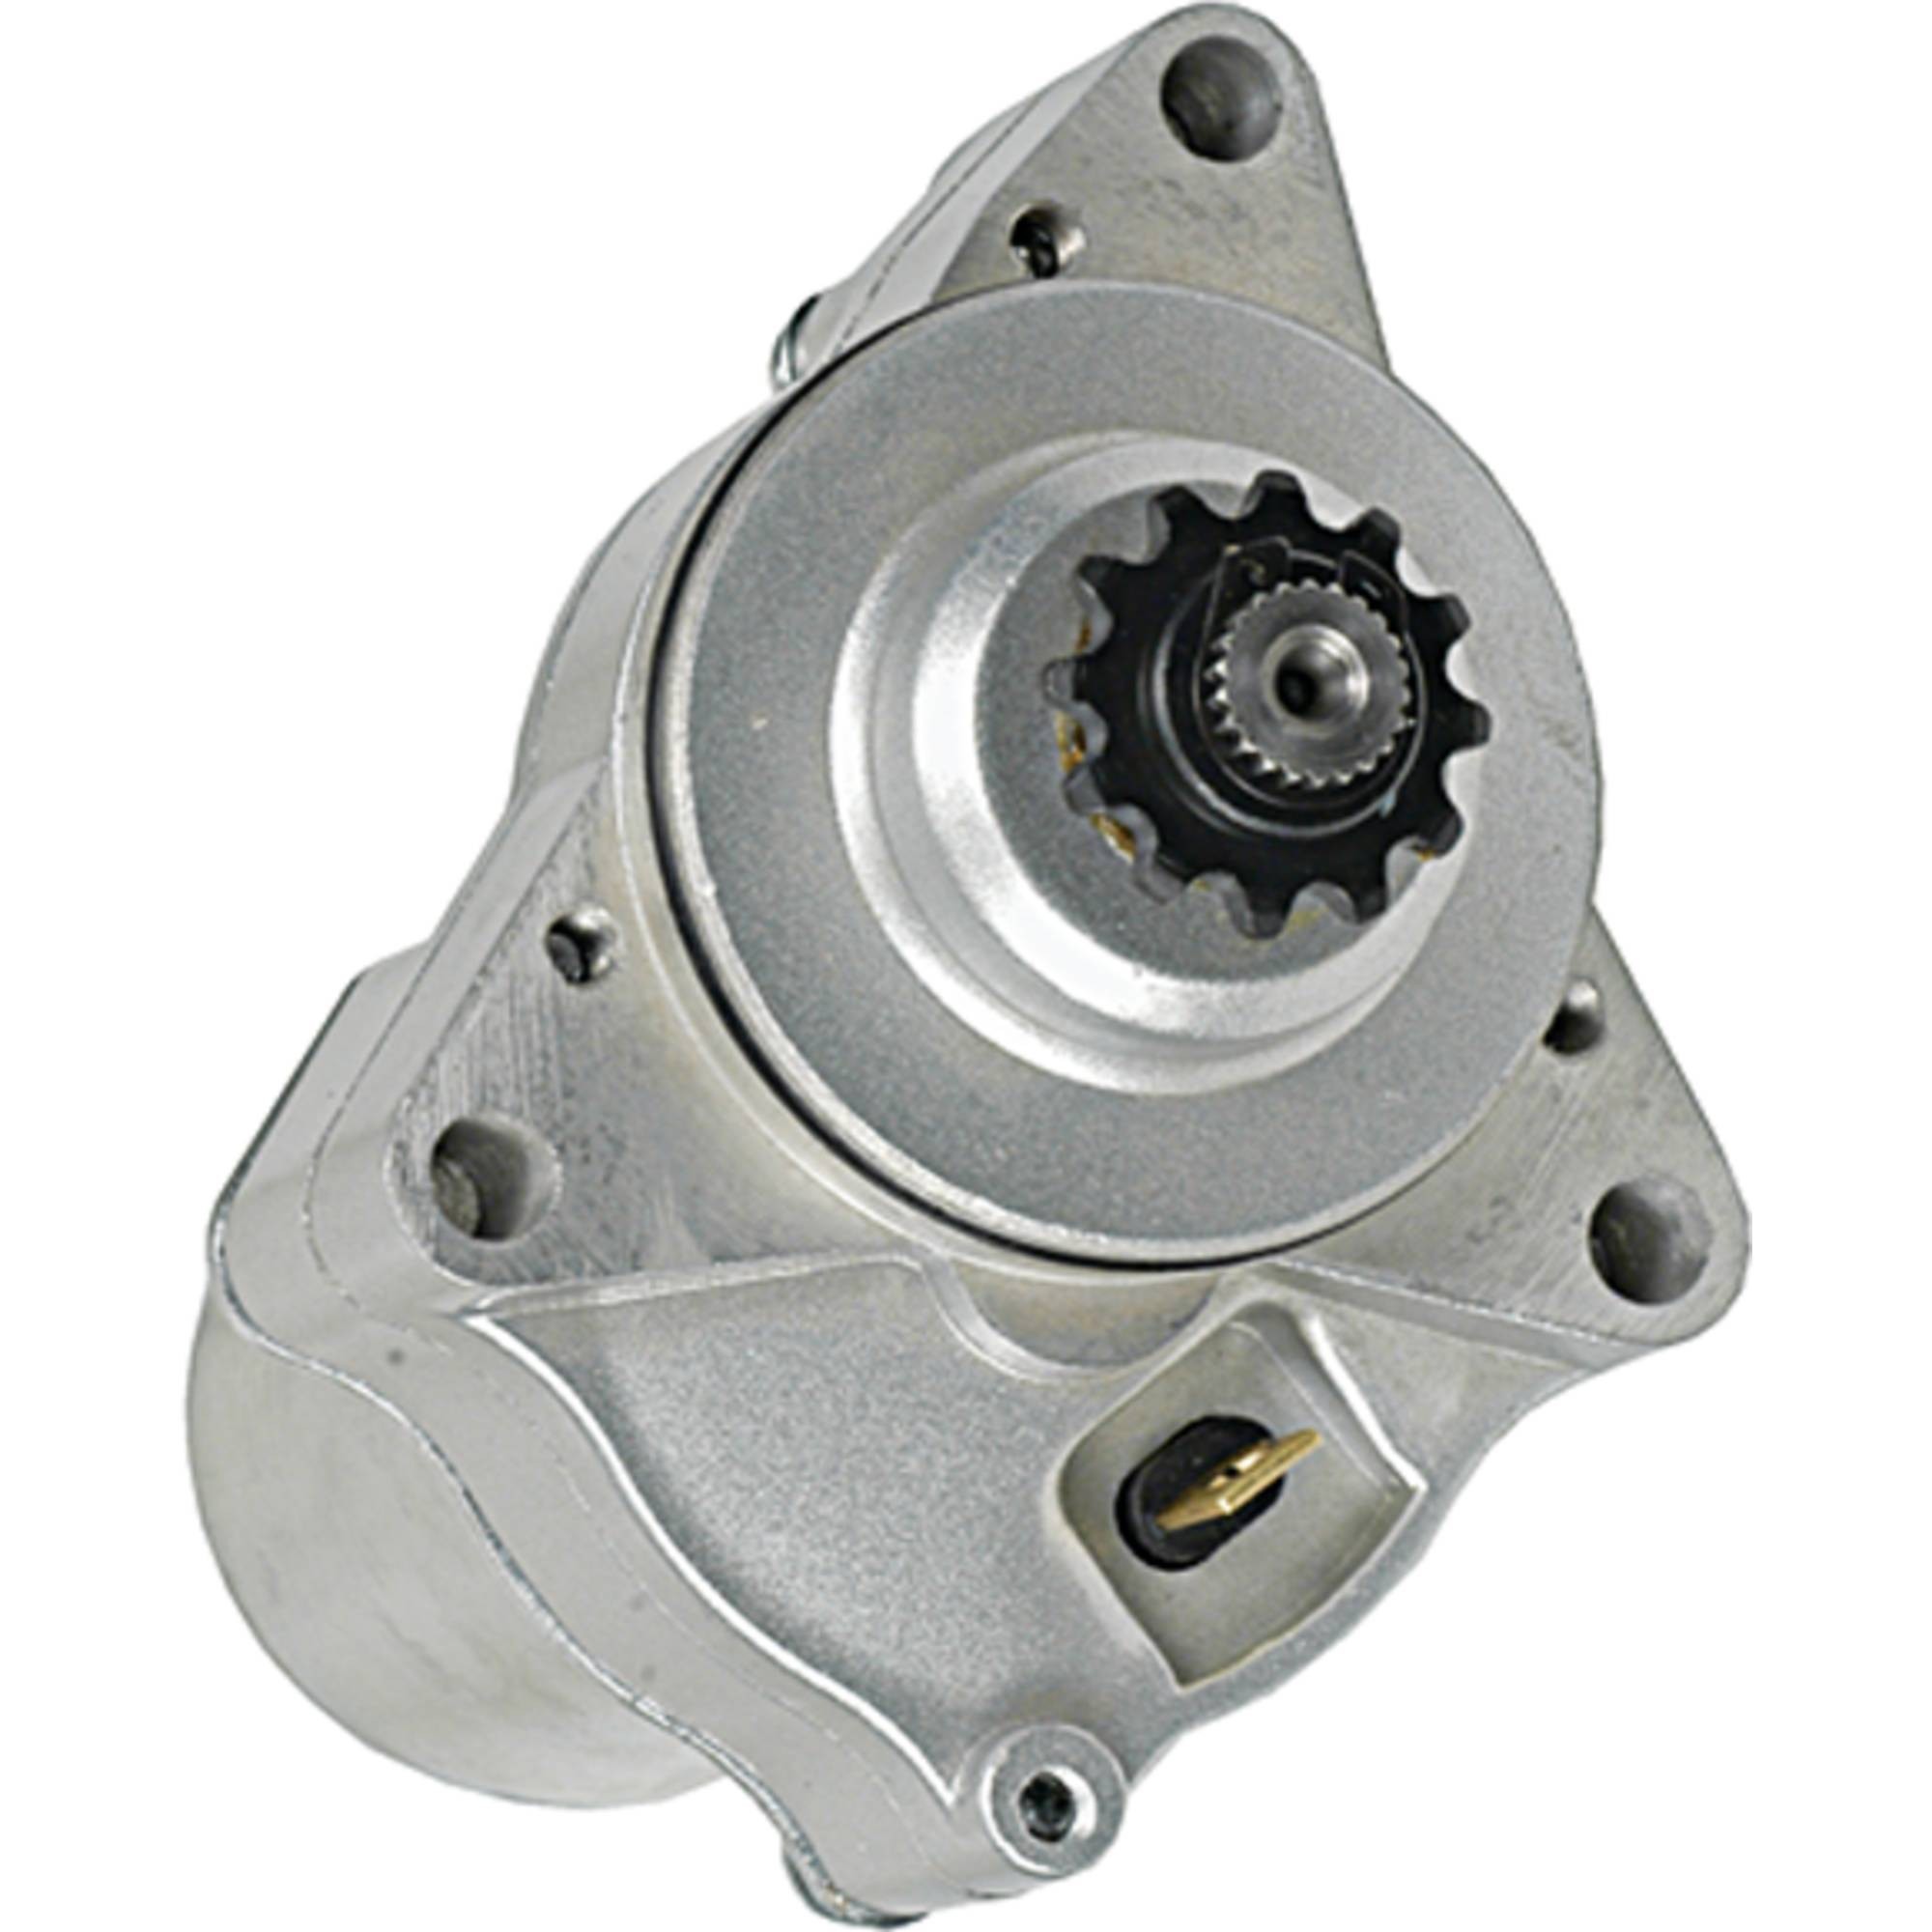 DB Electrical New Starter 410-58006 for Go Scoot Atv Kat 150 Lacoste 110 150 Panda 110 - image 1 of 5